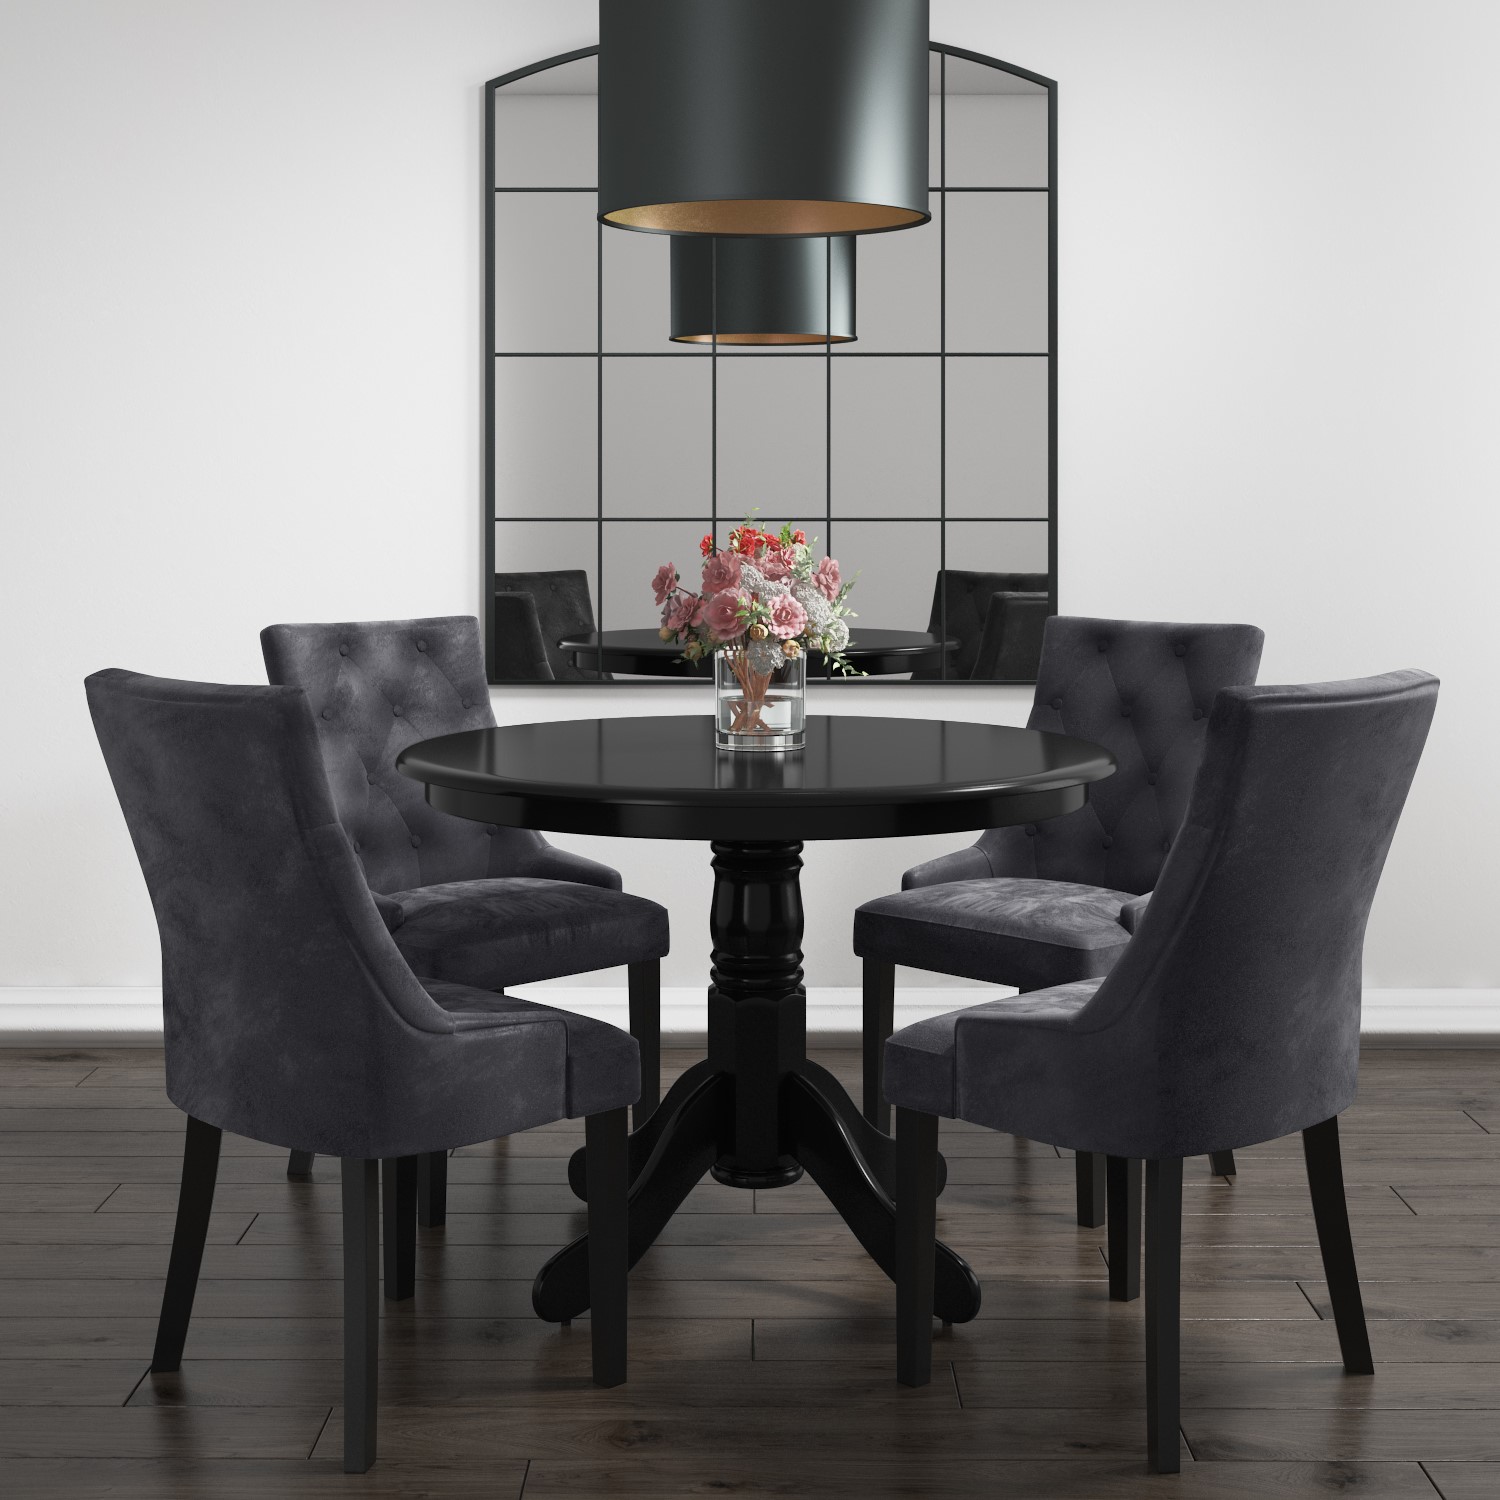 Small Round Dining Table In Black With 4 Velvet Chairs In Grey